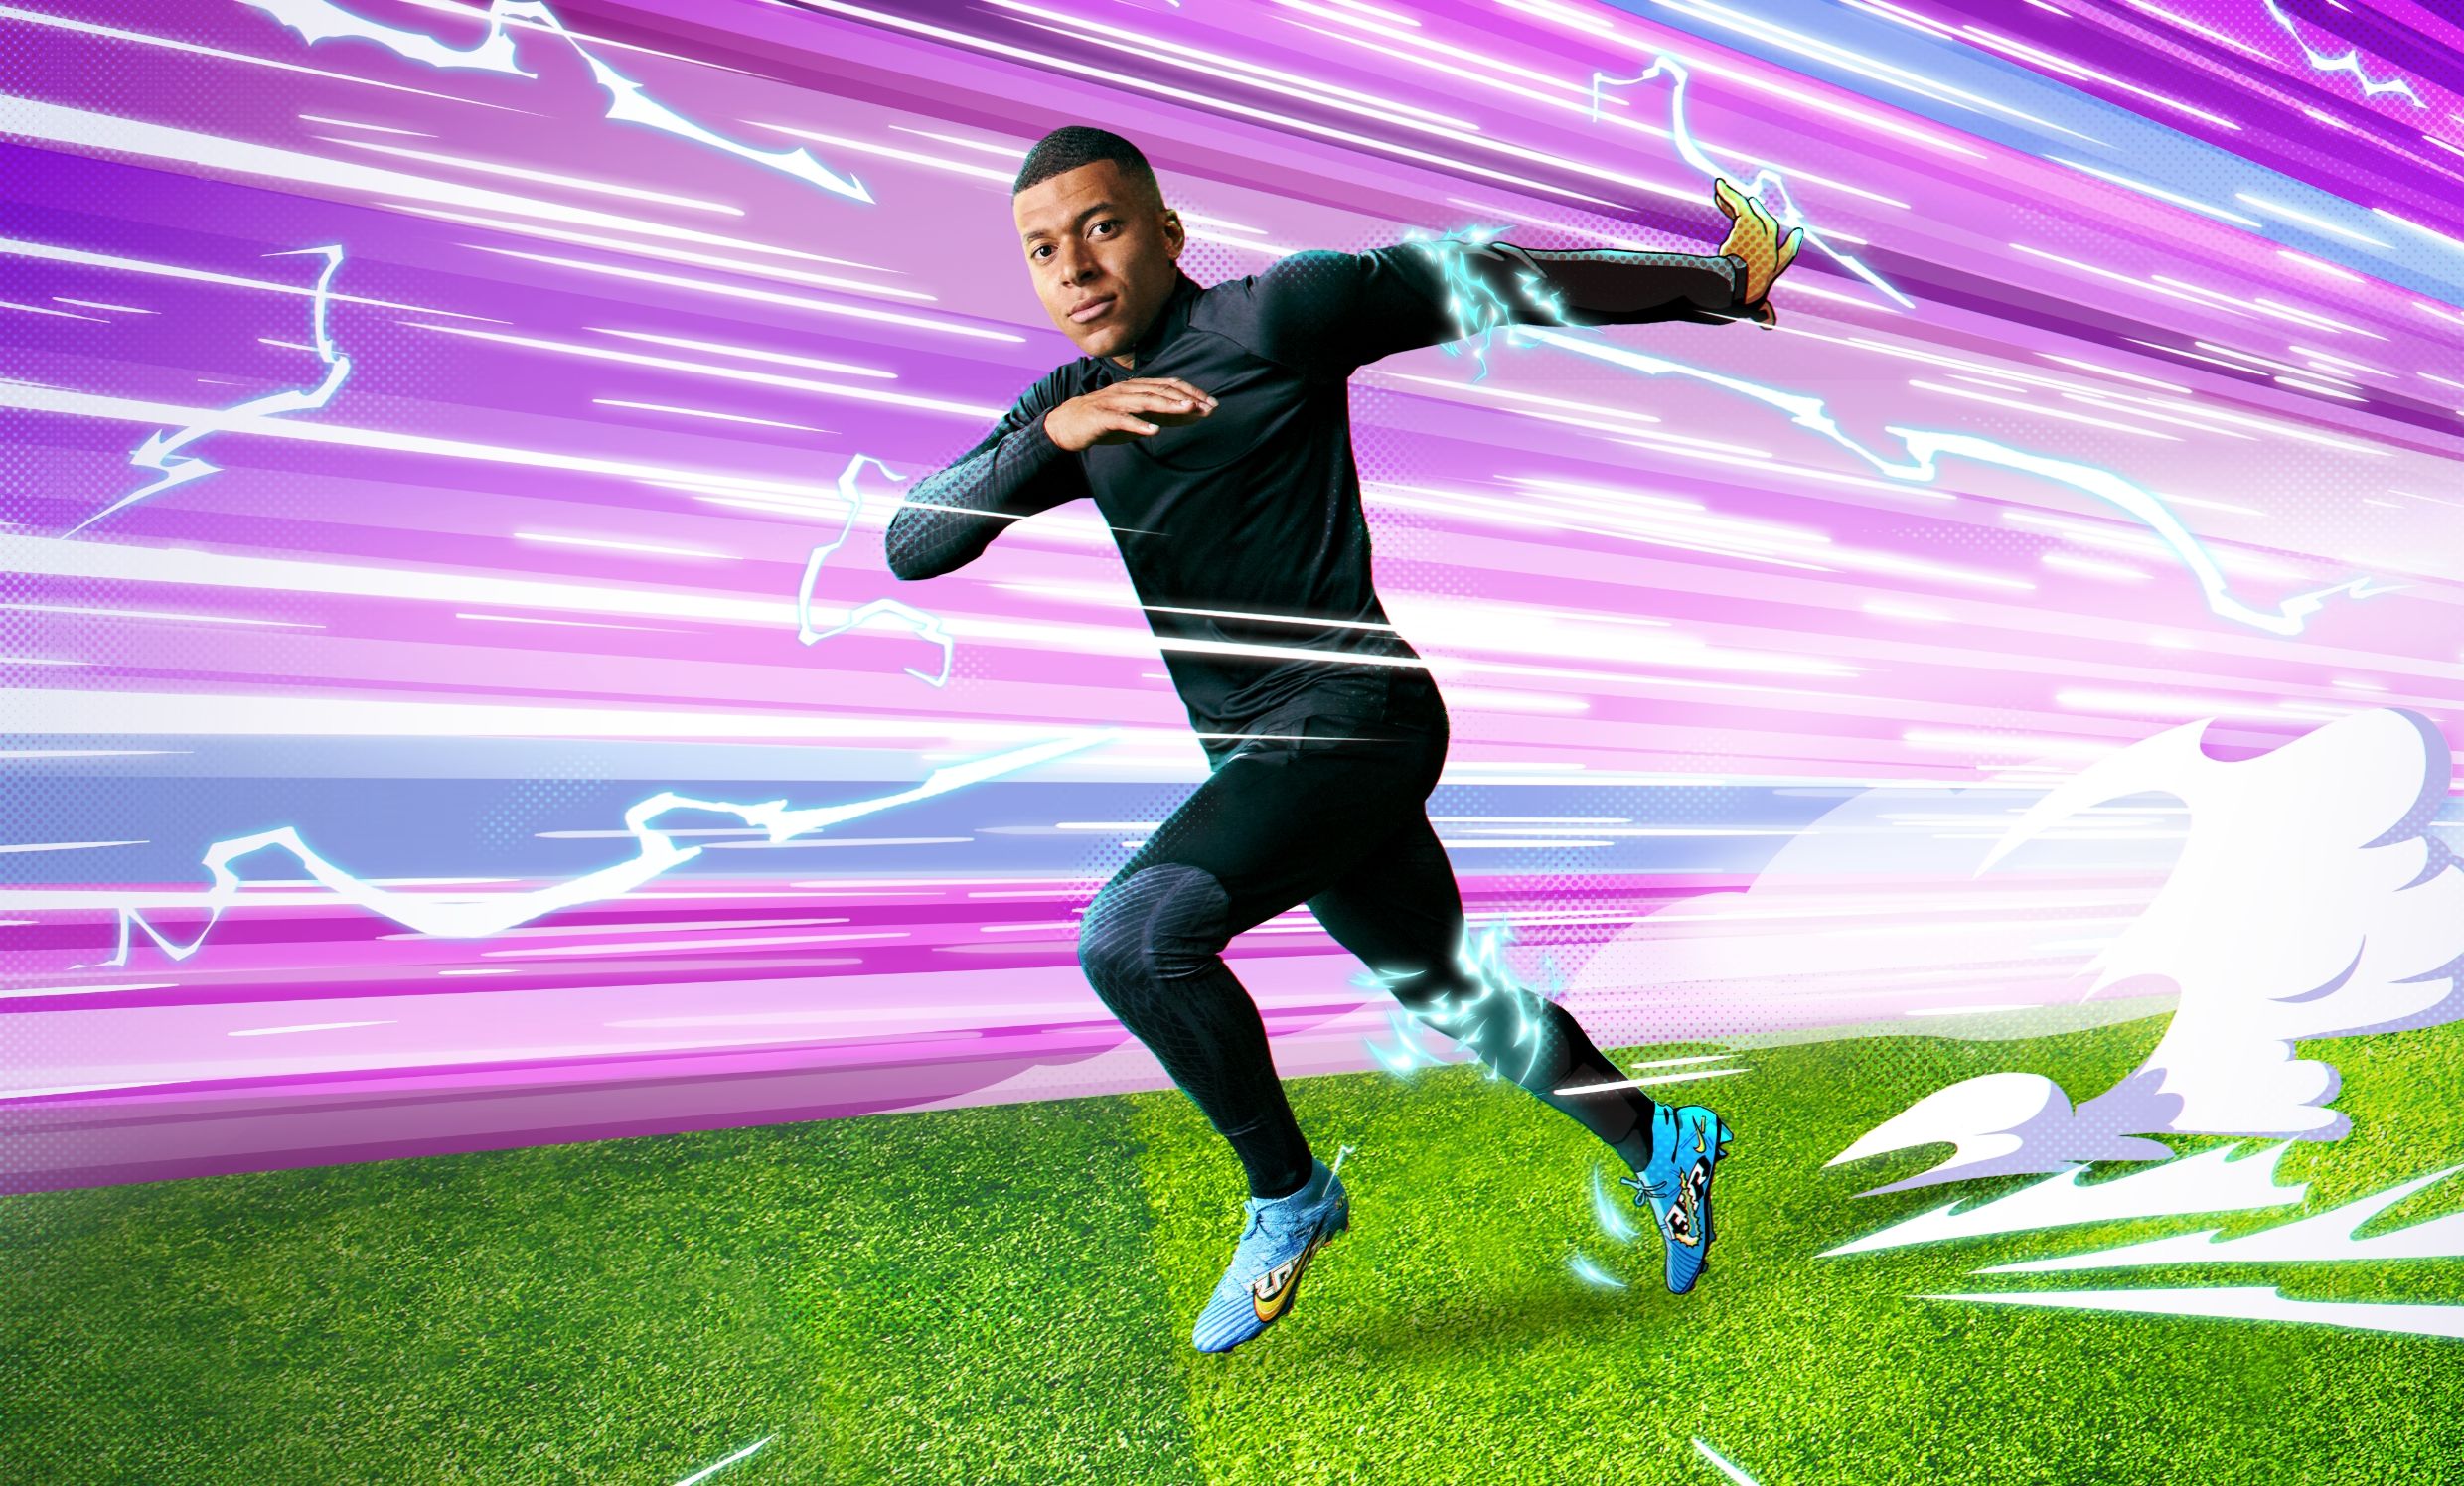 Kylian Mbappe running with cartoon electric speed lines and green turf